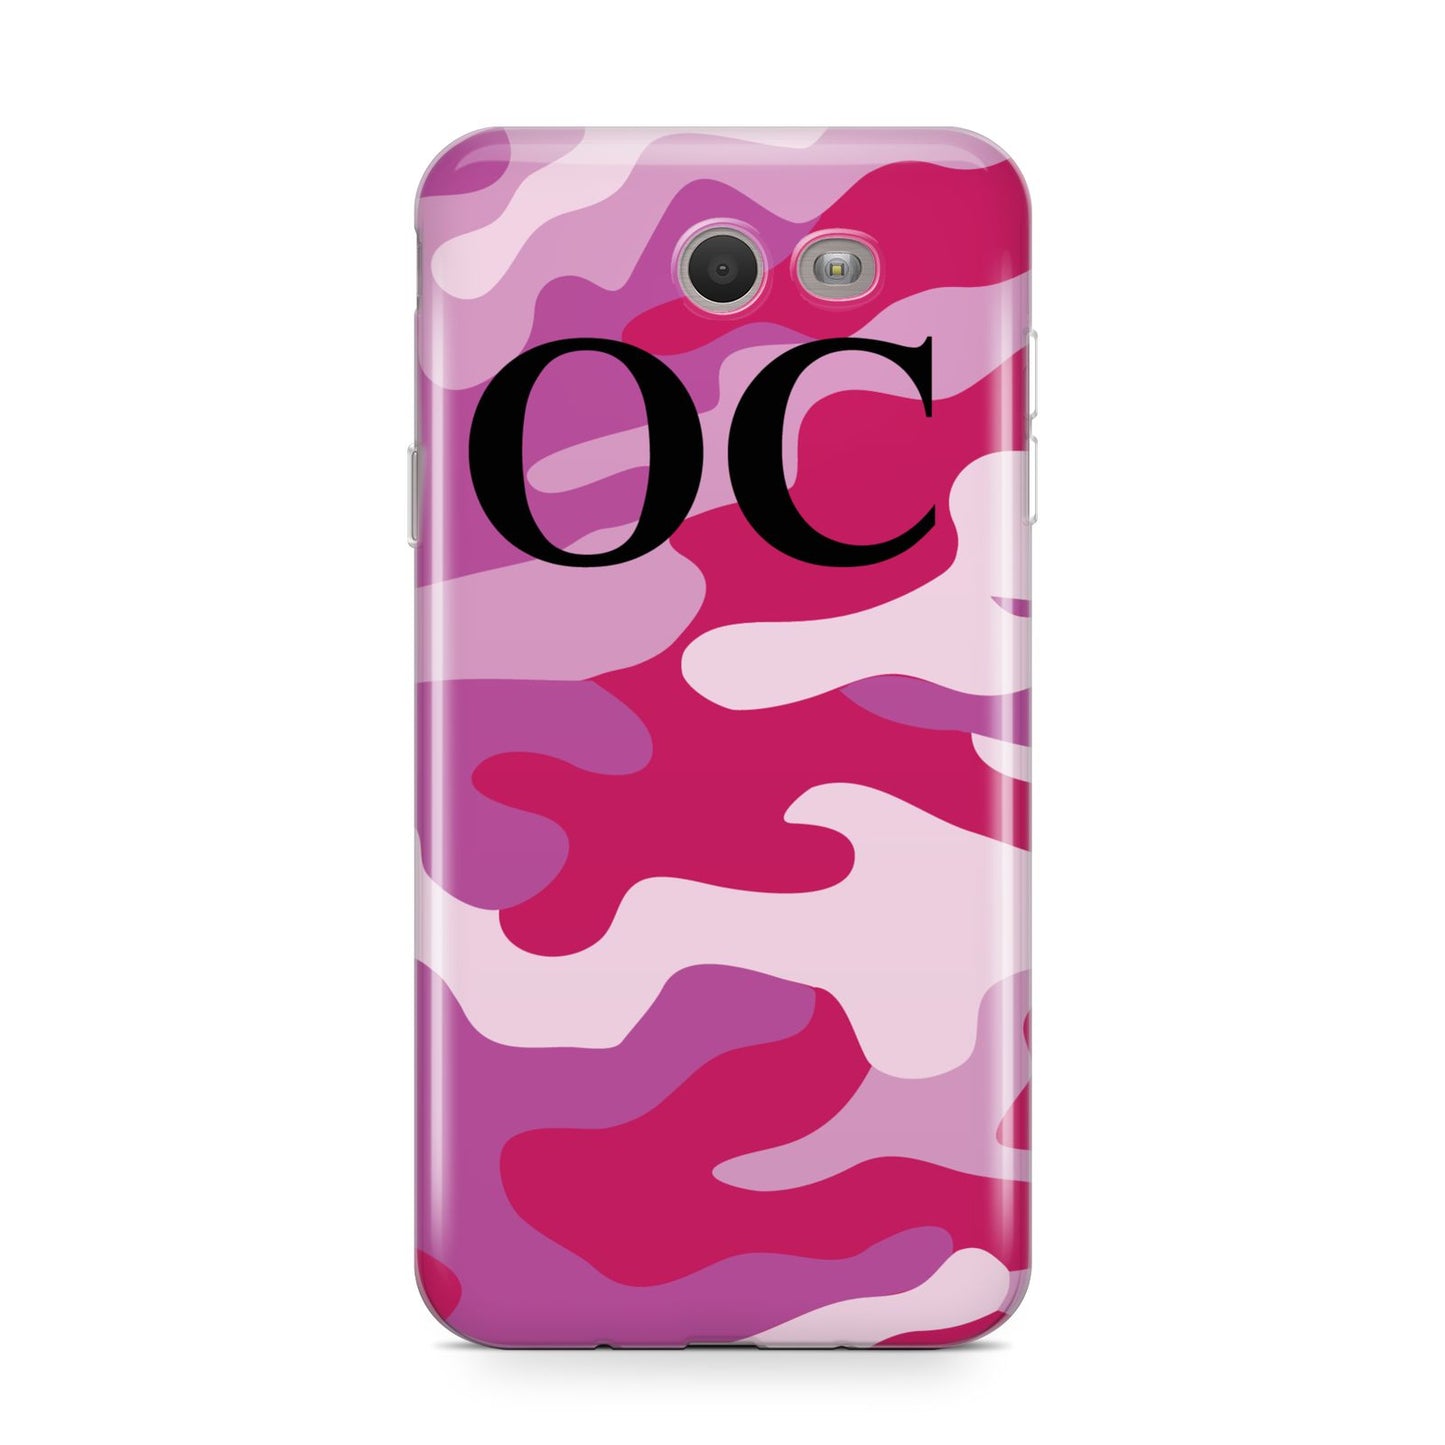 Camouflage Personalised Samsung Galaxy J7 2017 Case